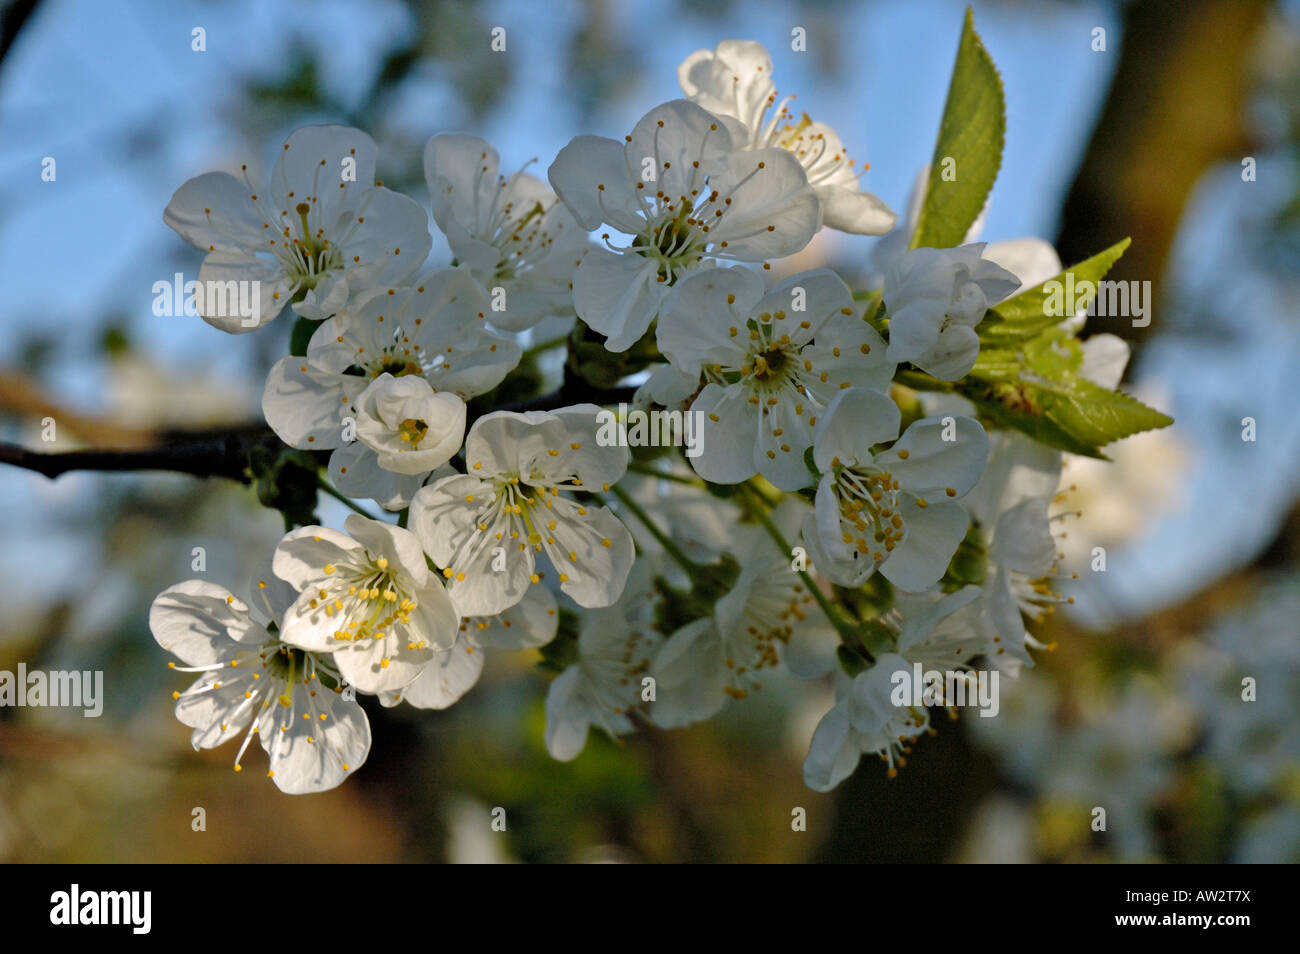 Blossoms on a sour cherry tree (prunus cerasus) against unsharp background. Stock Photo